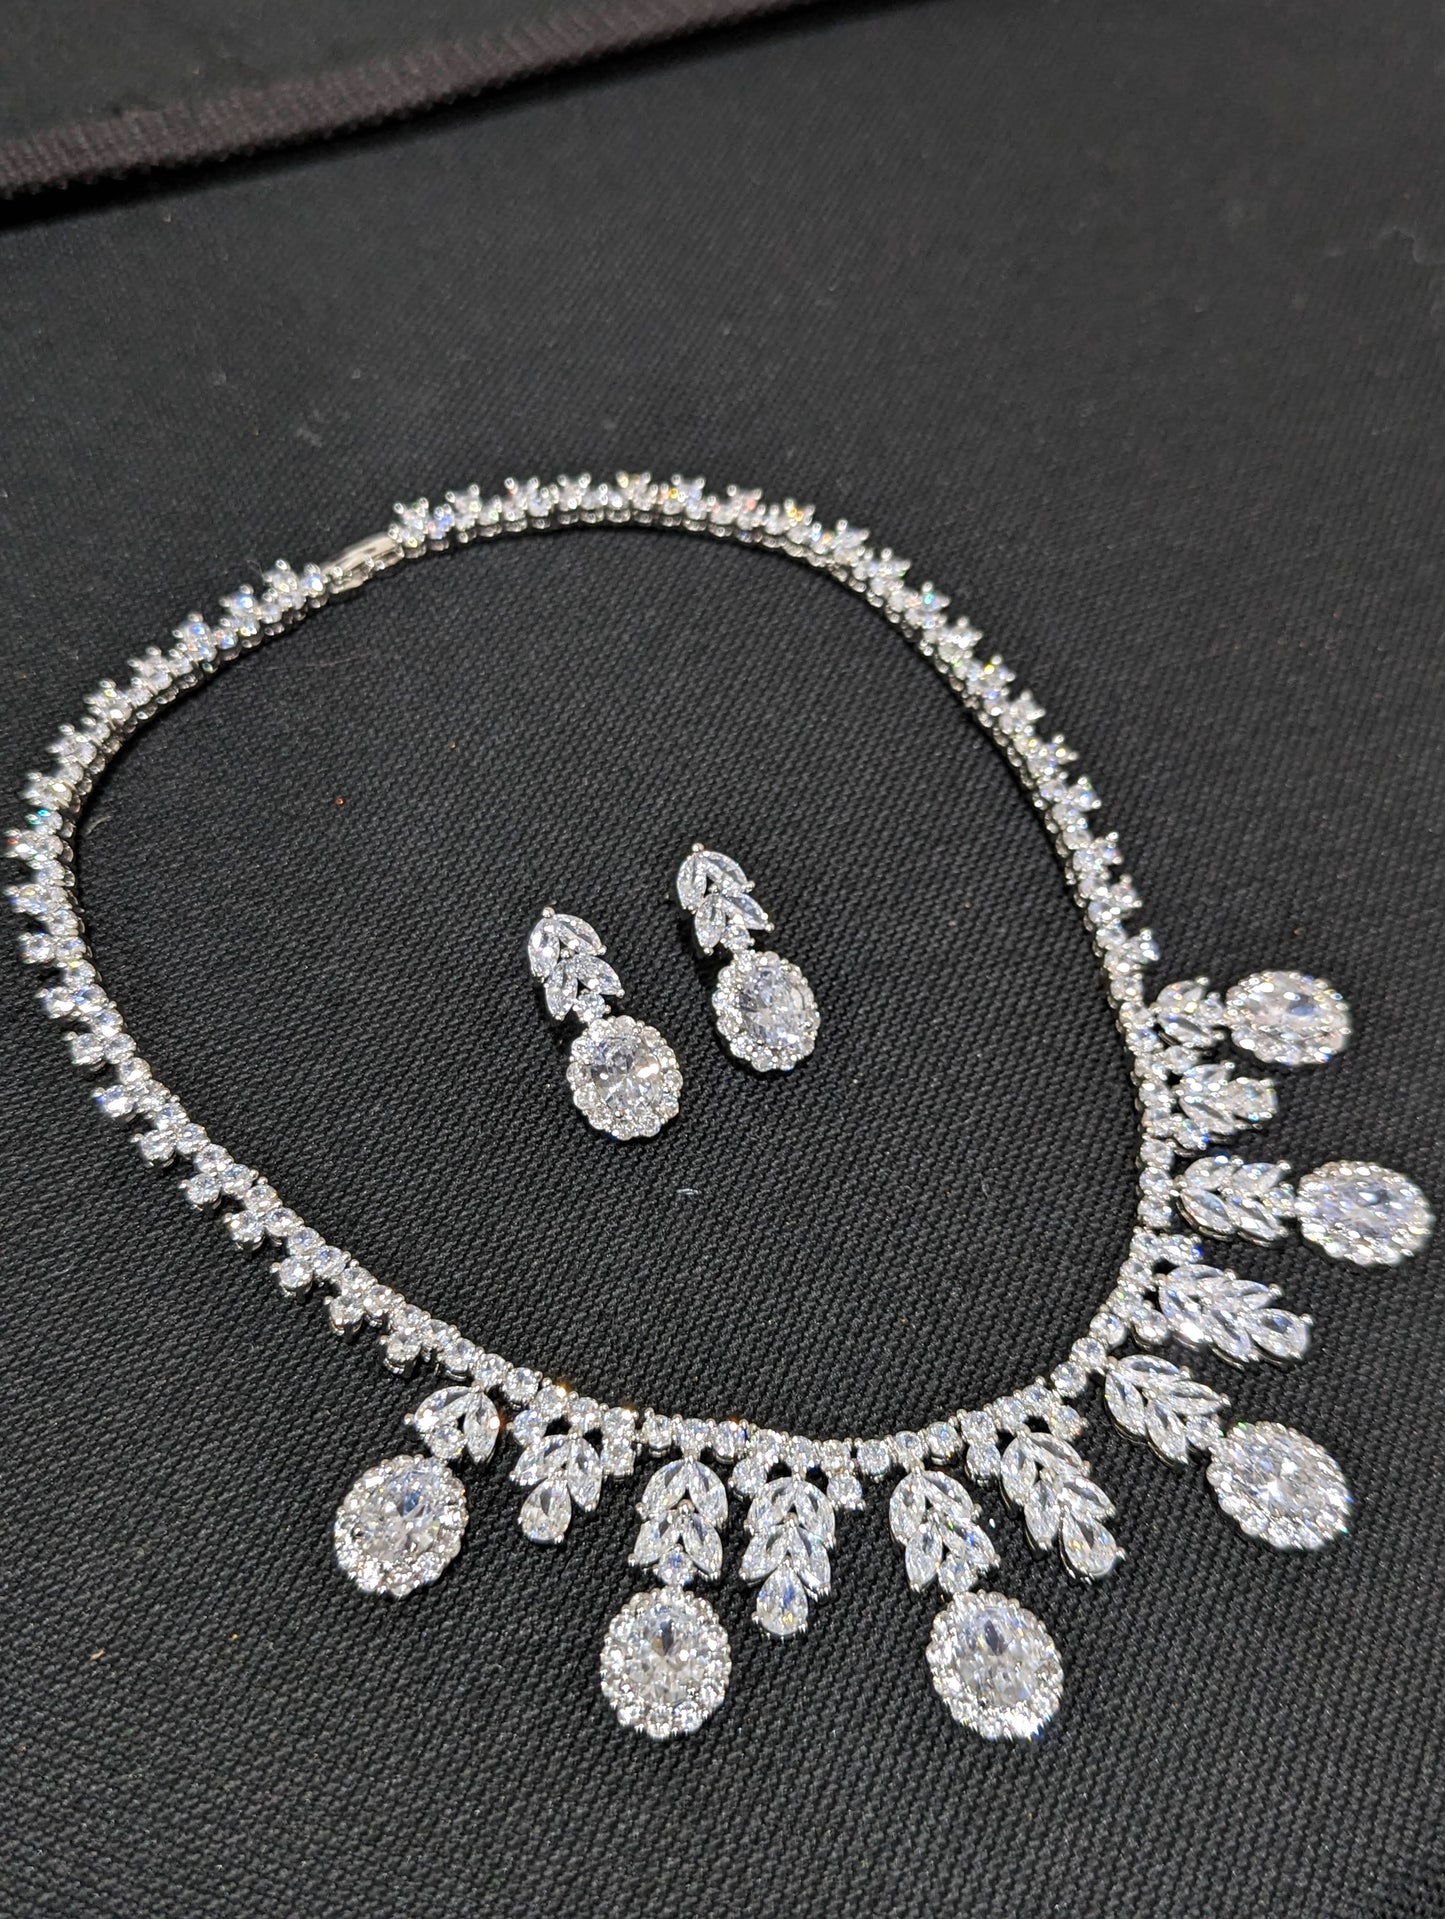 Diamond look Grand Shiny CZ Necklace and Earrings set